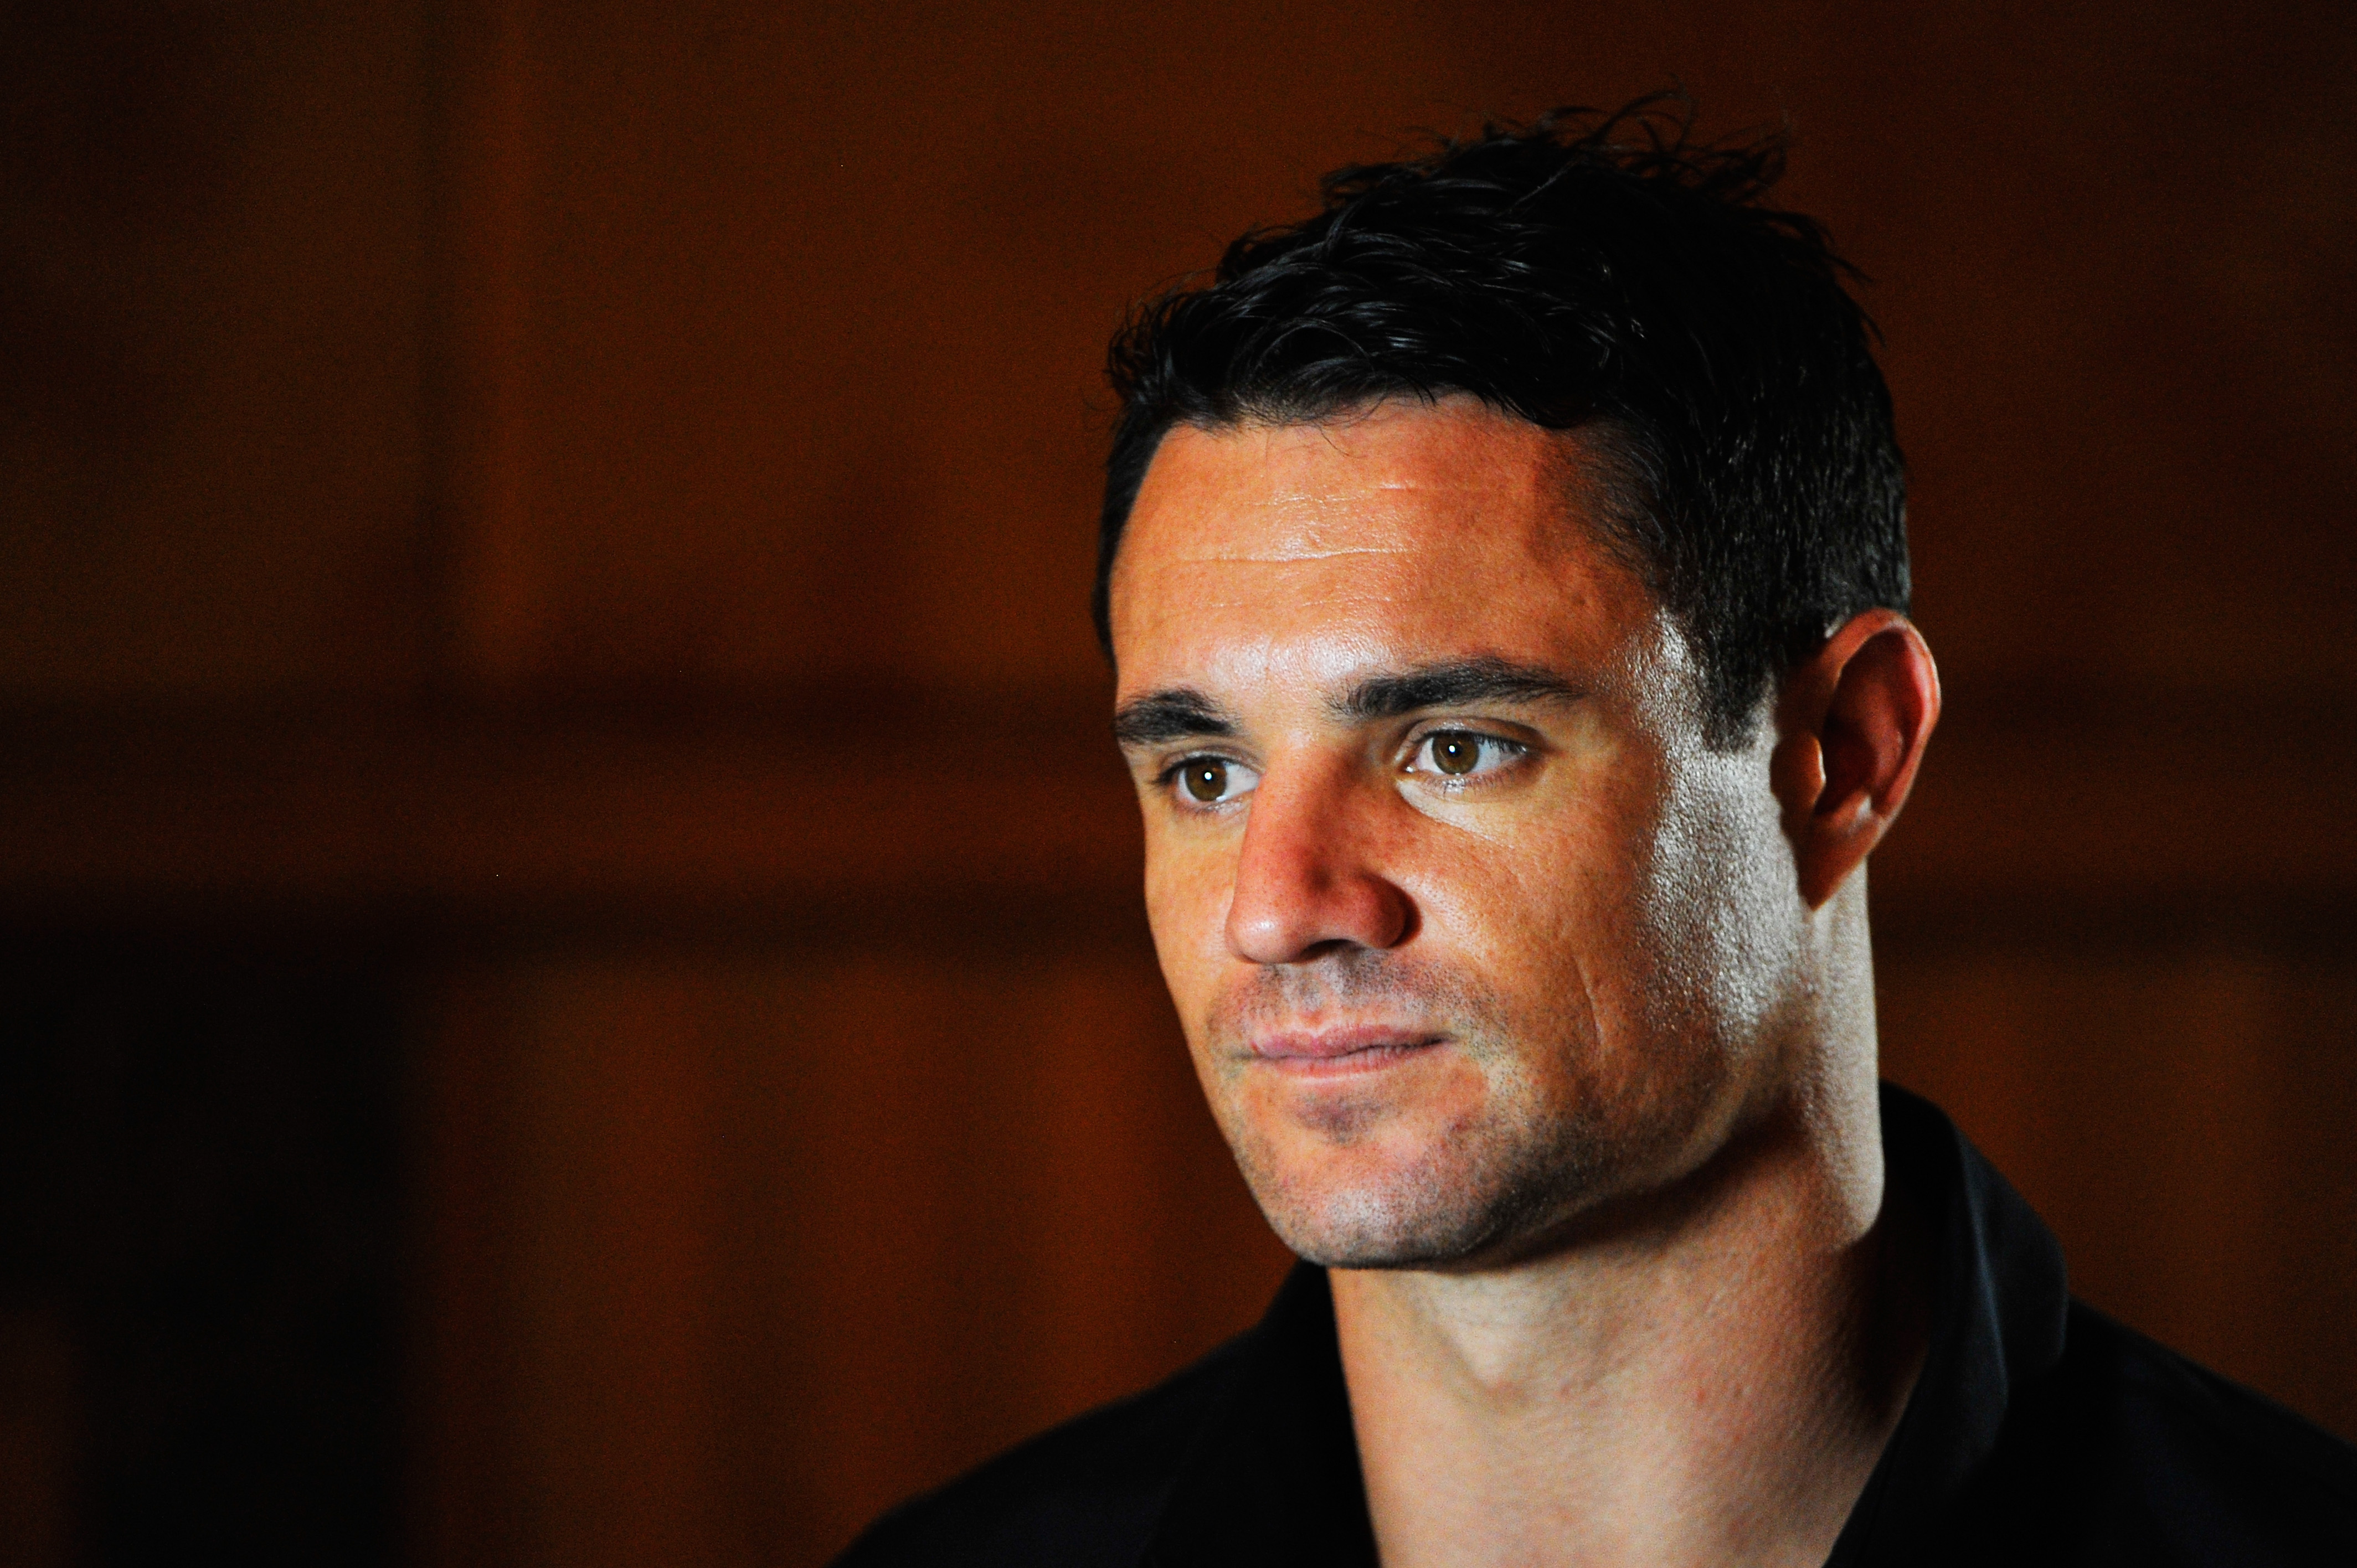 Dan Carter: Why Dan's desperate for more with New Zealand